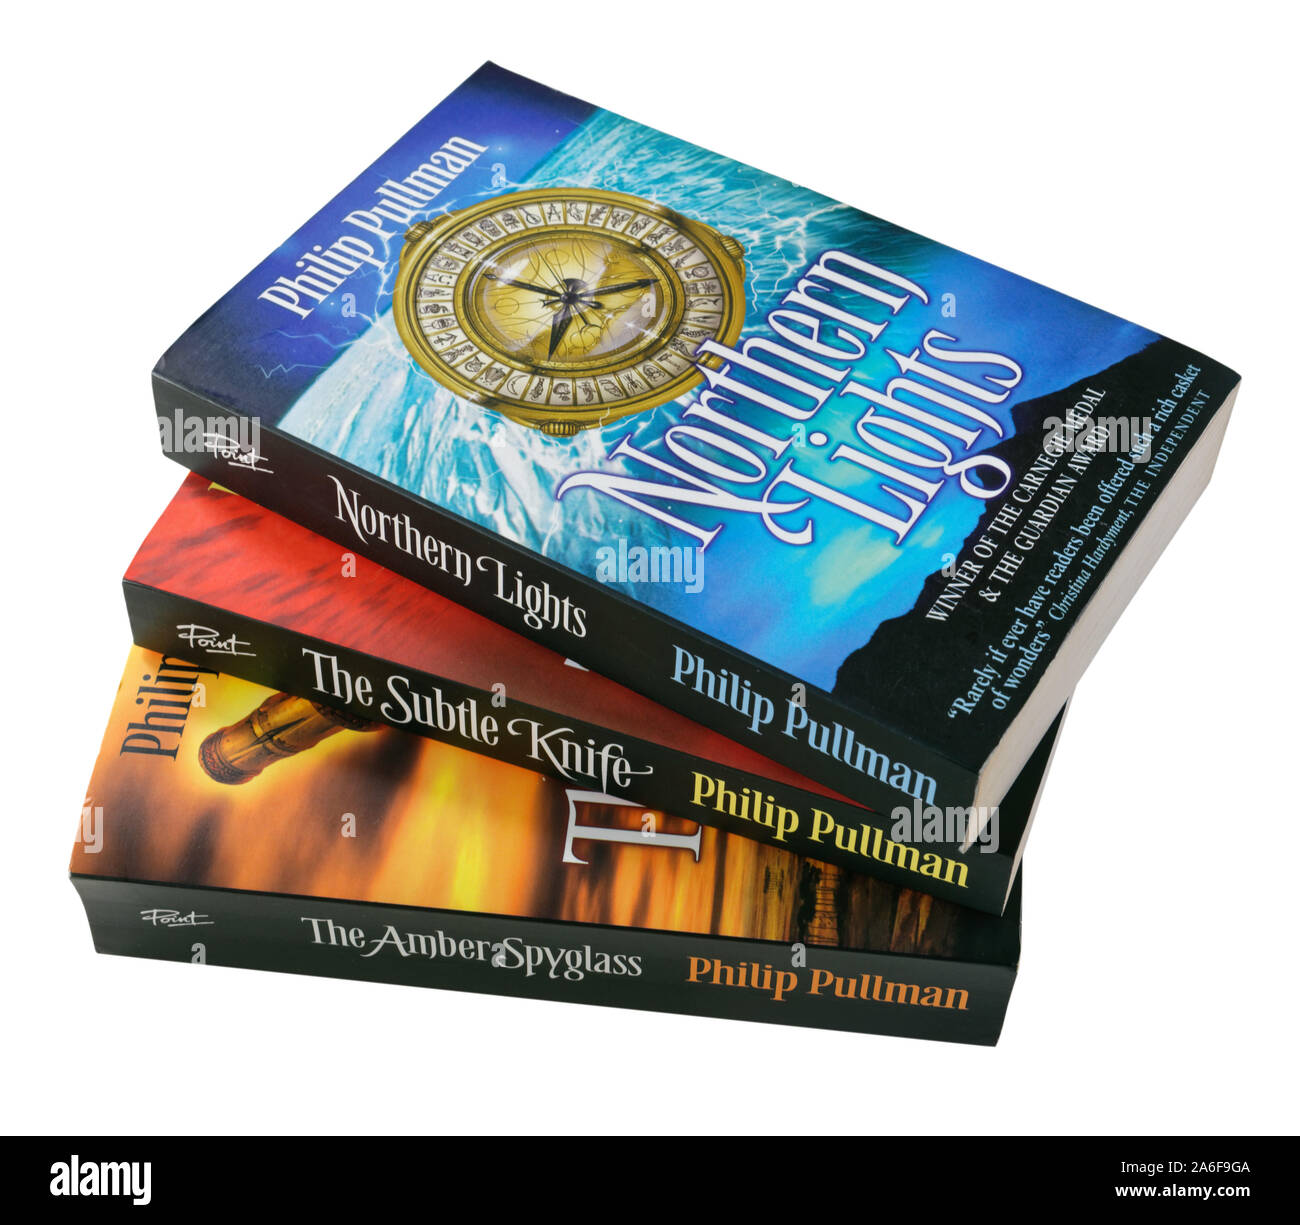 Northern Lights, The Knife and The Amber Spyglass Philip the 3 books of the His Dark trilogy Stock Photo - Alamy